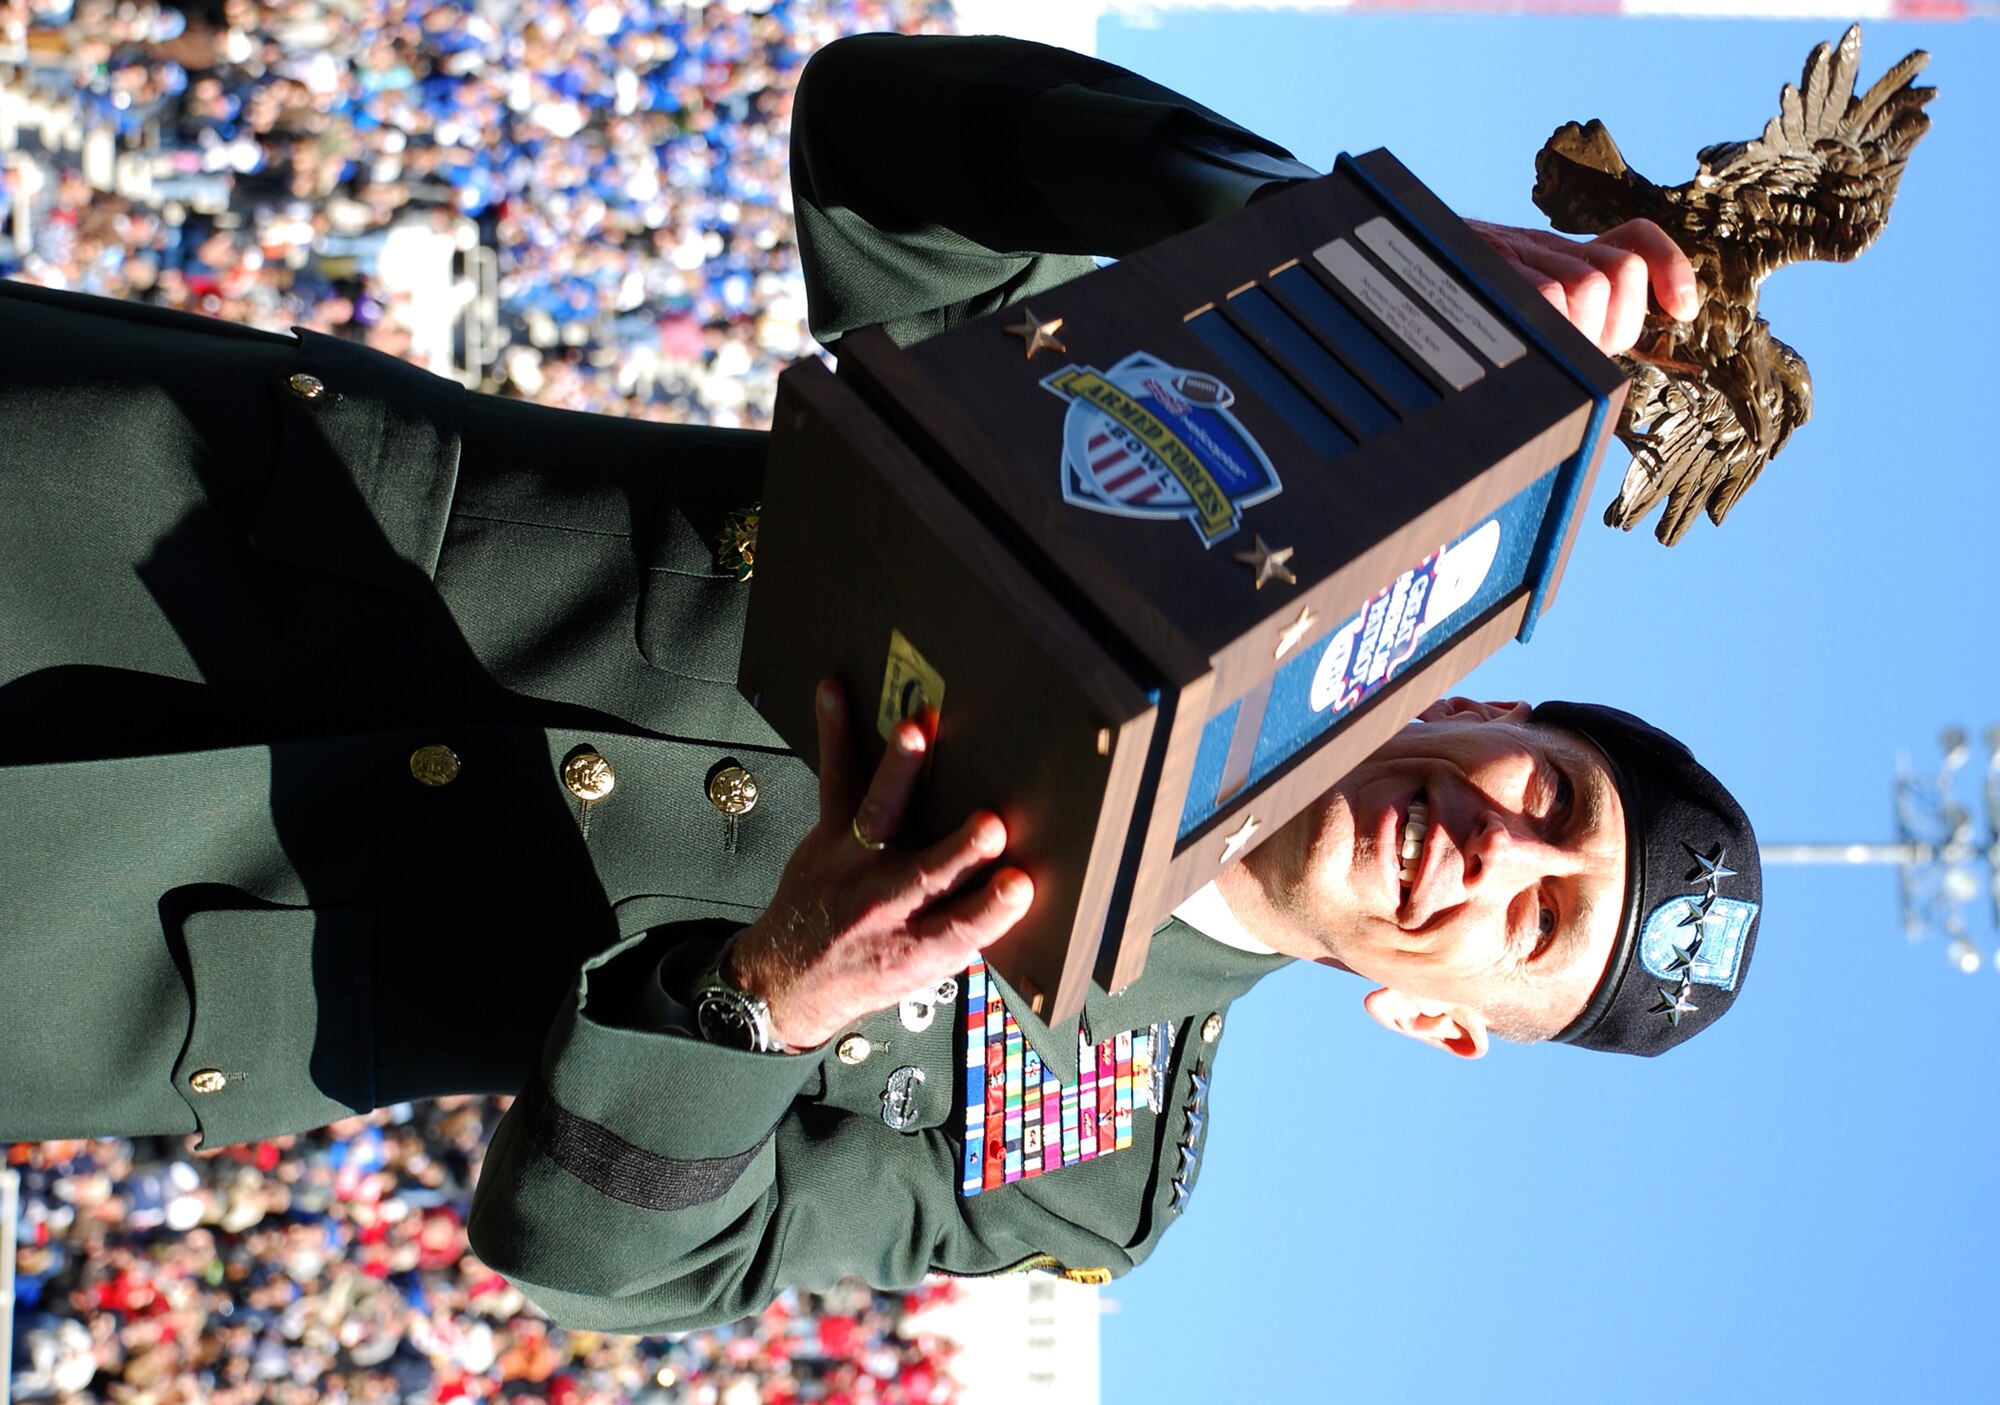 General David H. Petraeus, U.S. Central Command commander, accepts the Armed Forces Insurance Great American Patriot Award during halftime activities at this year's Armed Forces Bowl in Fort Worth, Texas. The Air Force Academy fell to the University of Houston, 28 to 34. (U.S. Air Force Photo/Tech. Sgt. Julie Briden-Garcia)